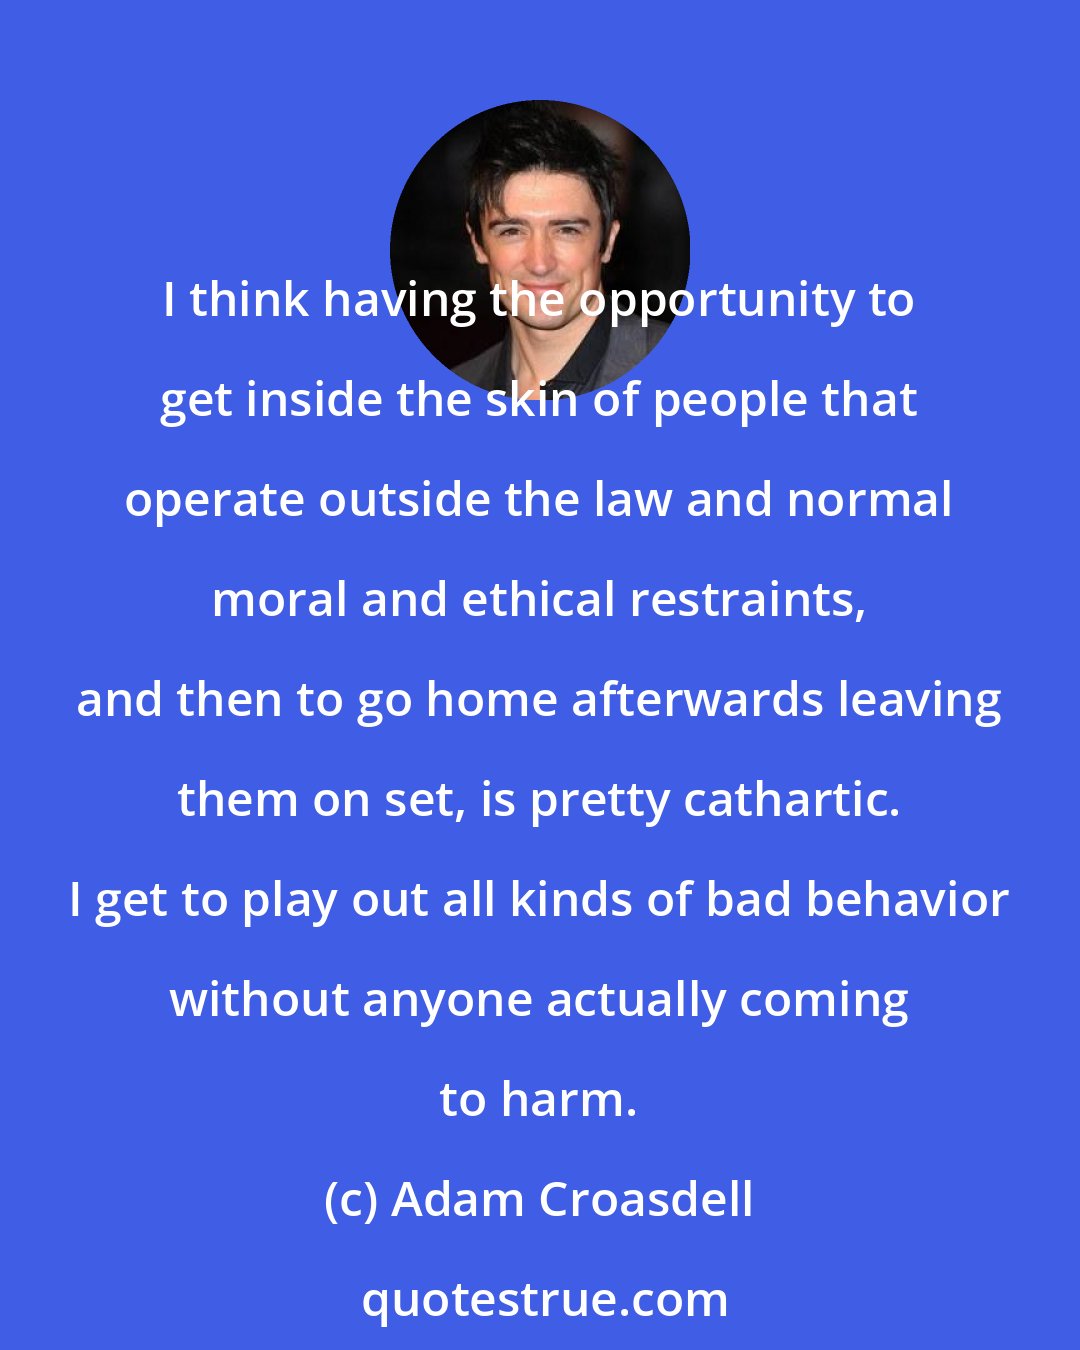 Adam Croasdell: I think having the opportunity to get inside the skin of people that operate outside the law and normal moral and ethical restraints, and then to go home afterwards leaving them on set, is pretty cathartic. I get to play out all kinds of bad behavior without anyone actually coming to harm.